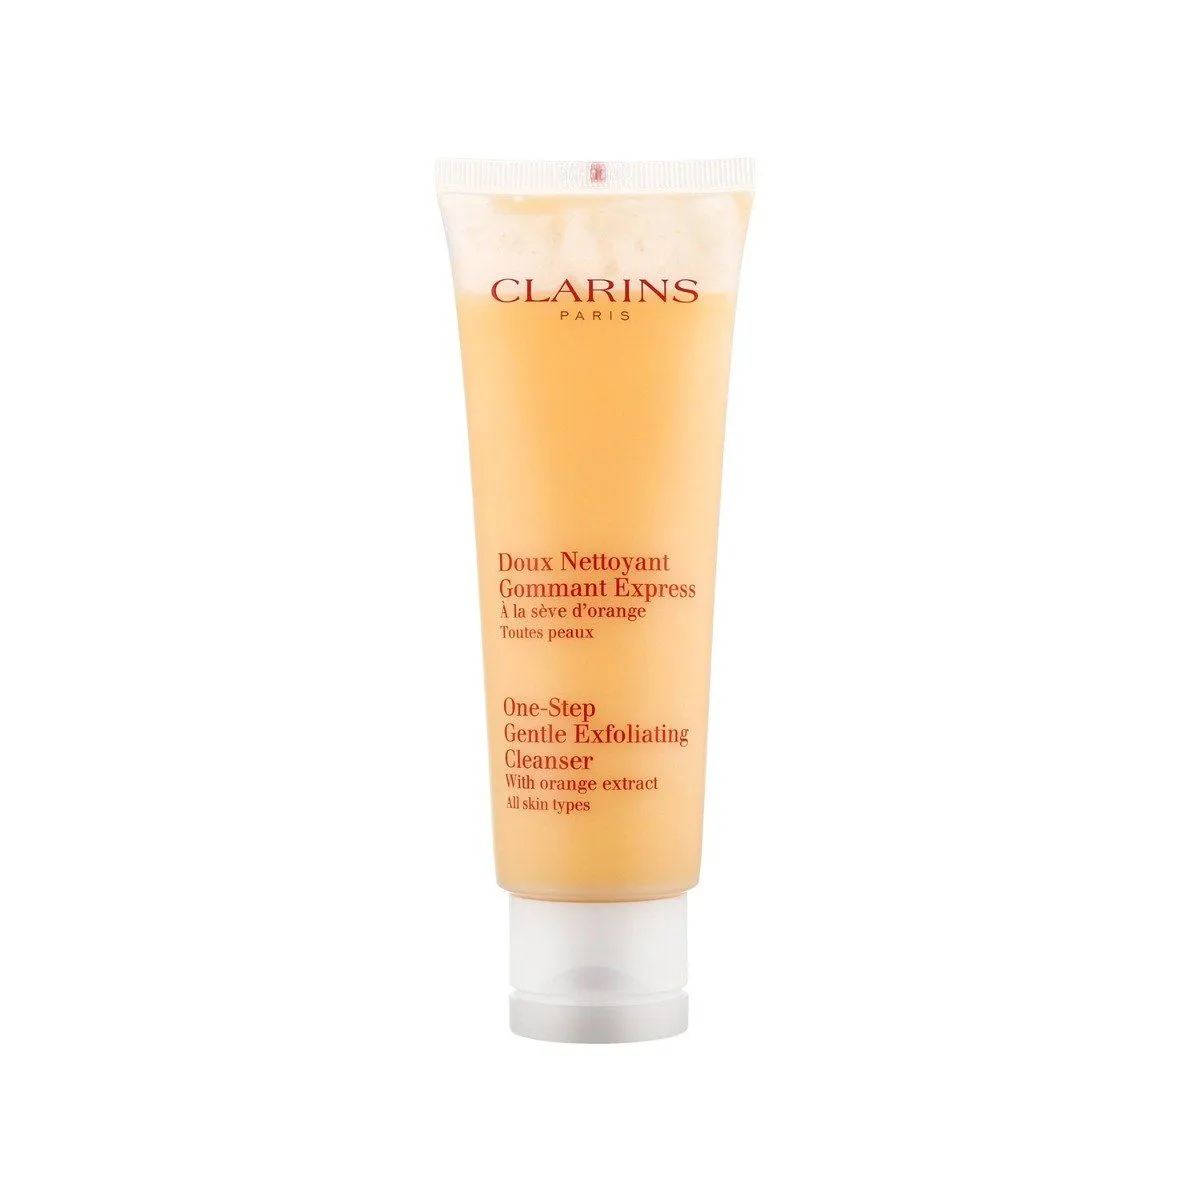 Gentle Exfoliating Cleanser by Clarins, one of the best Clarins products